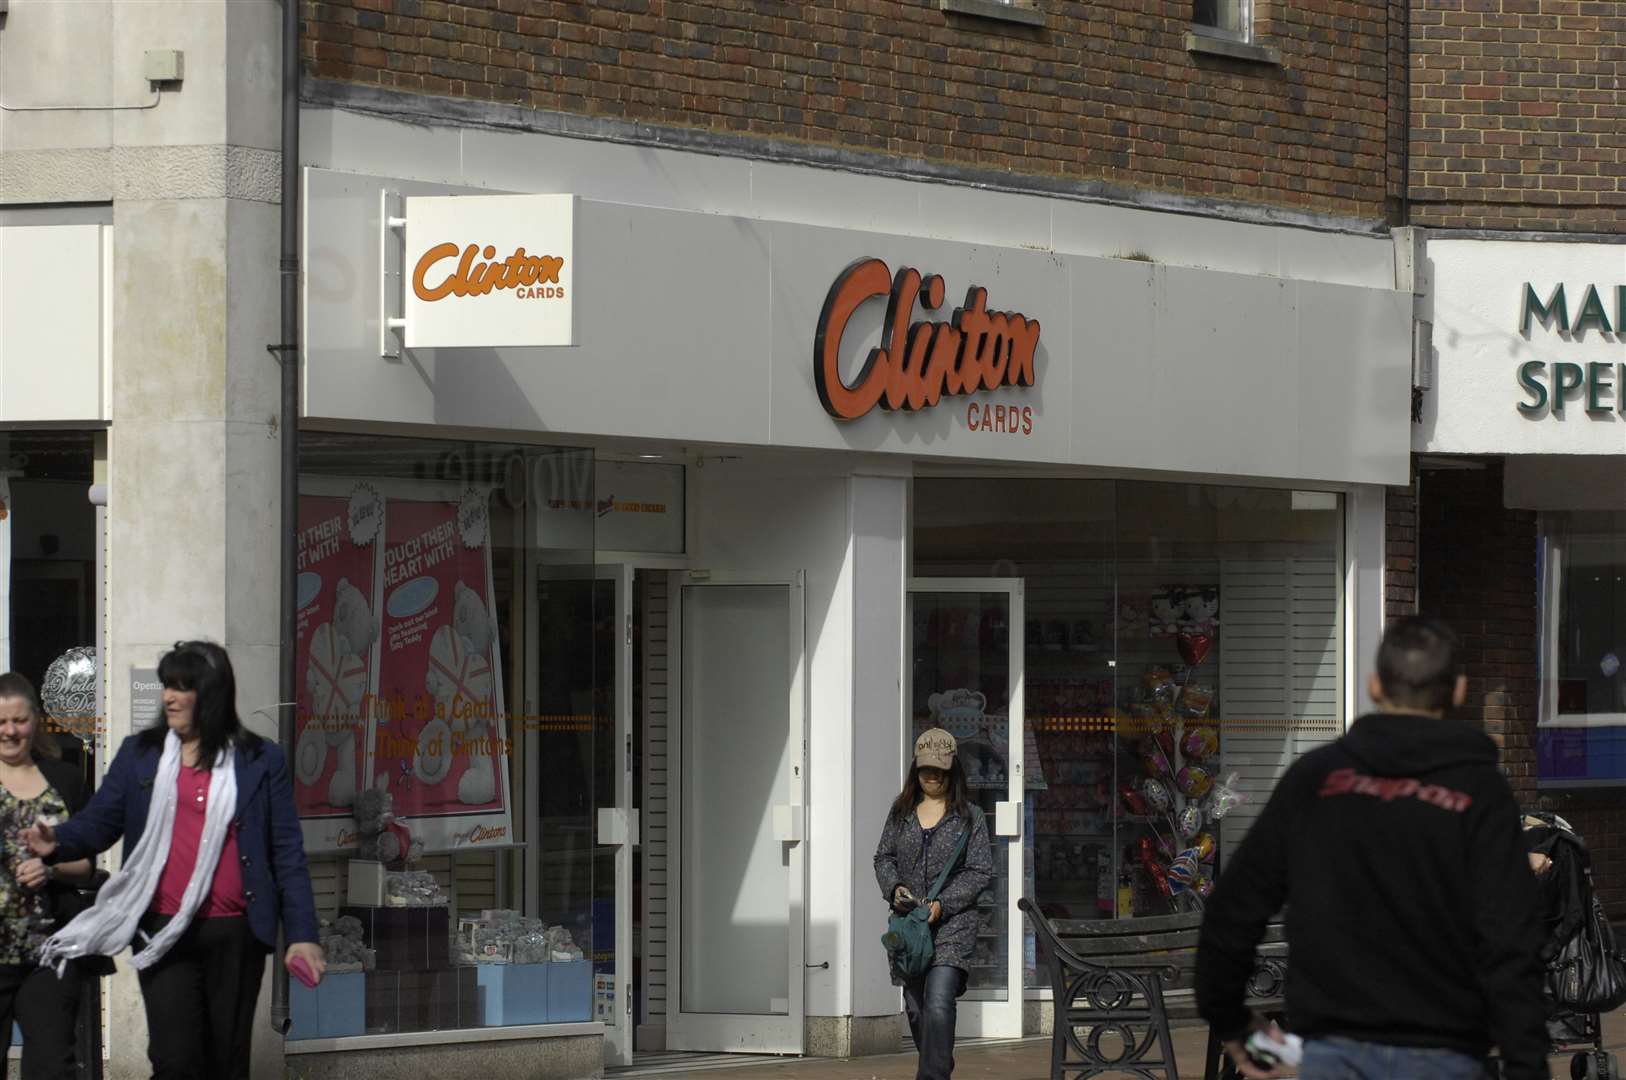 Ashford lost its Clinton Cards store - pictured here in 2012 - three years ago